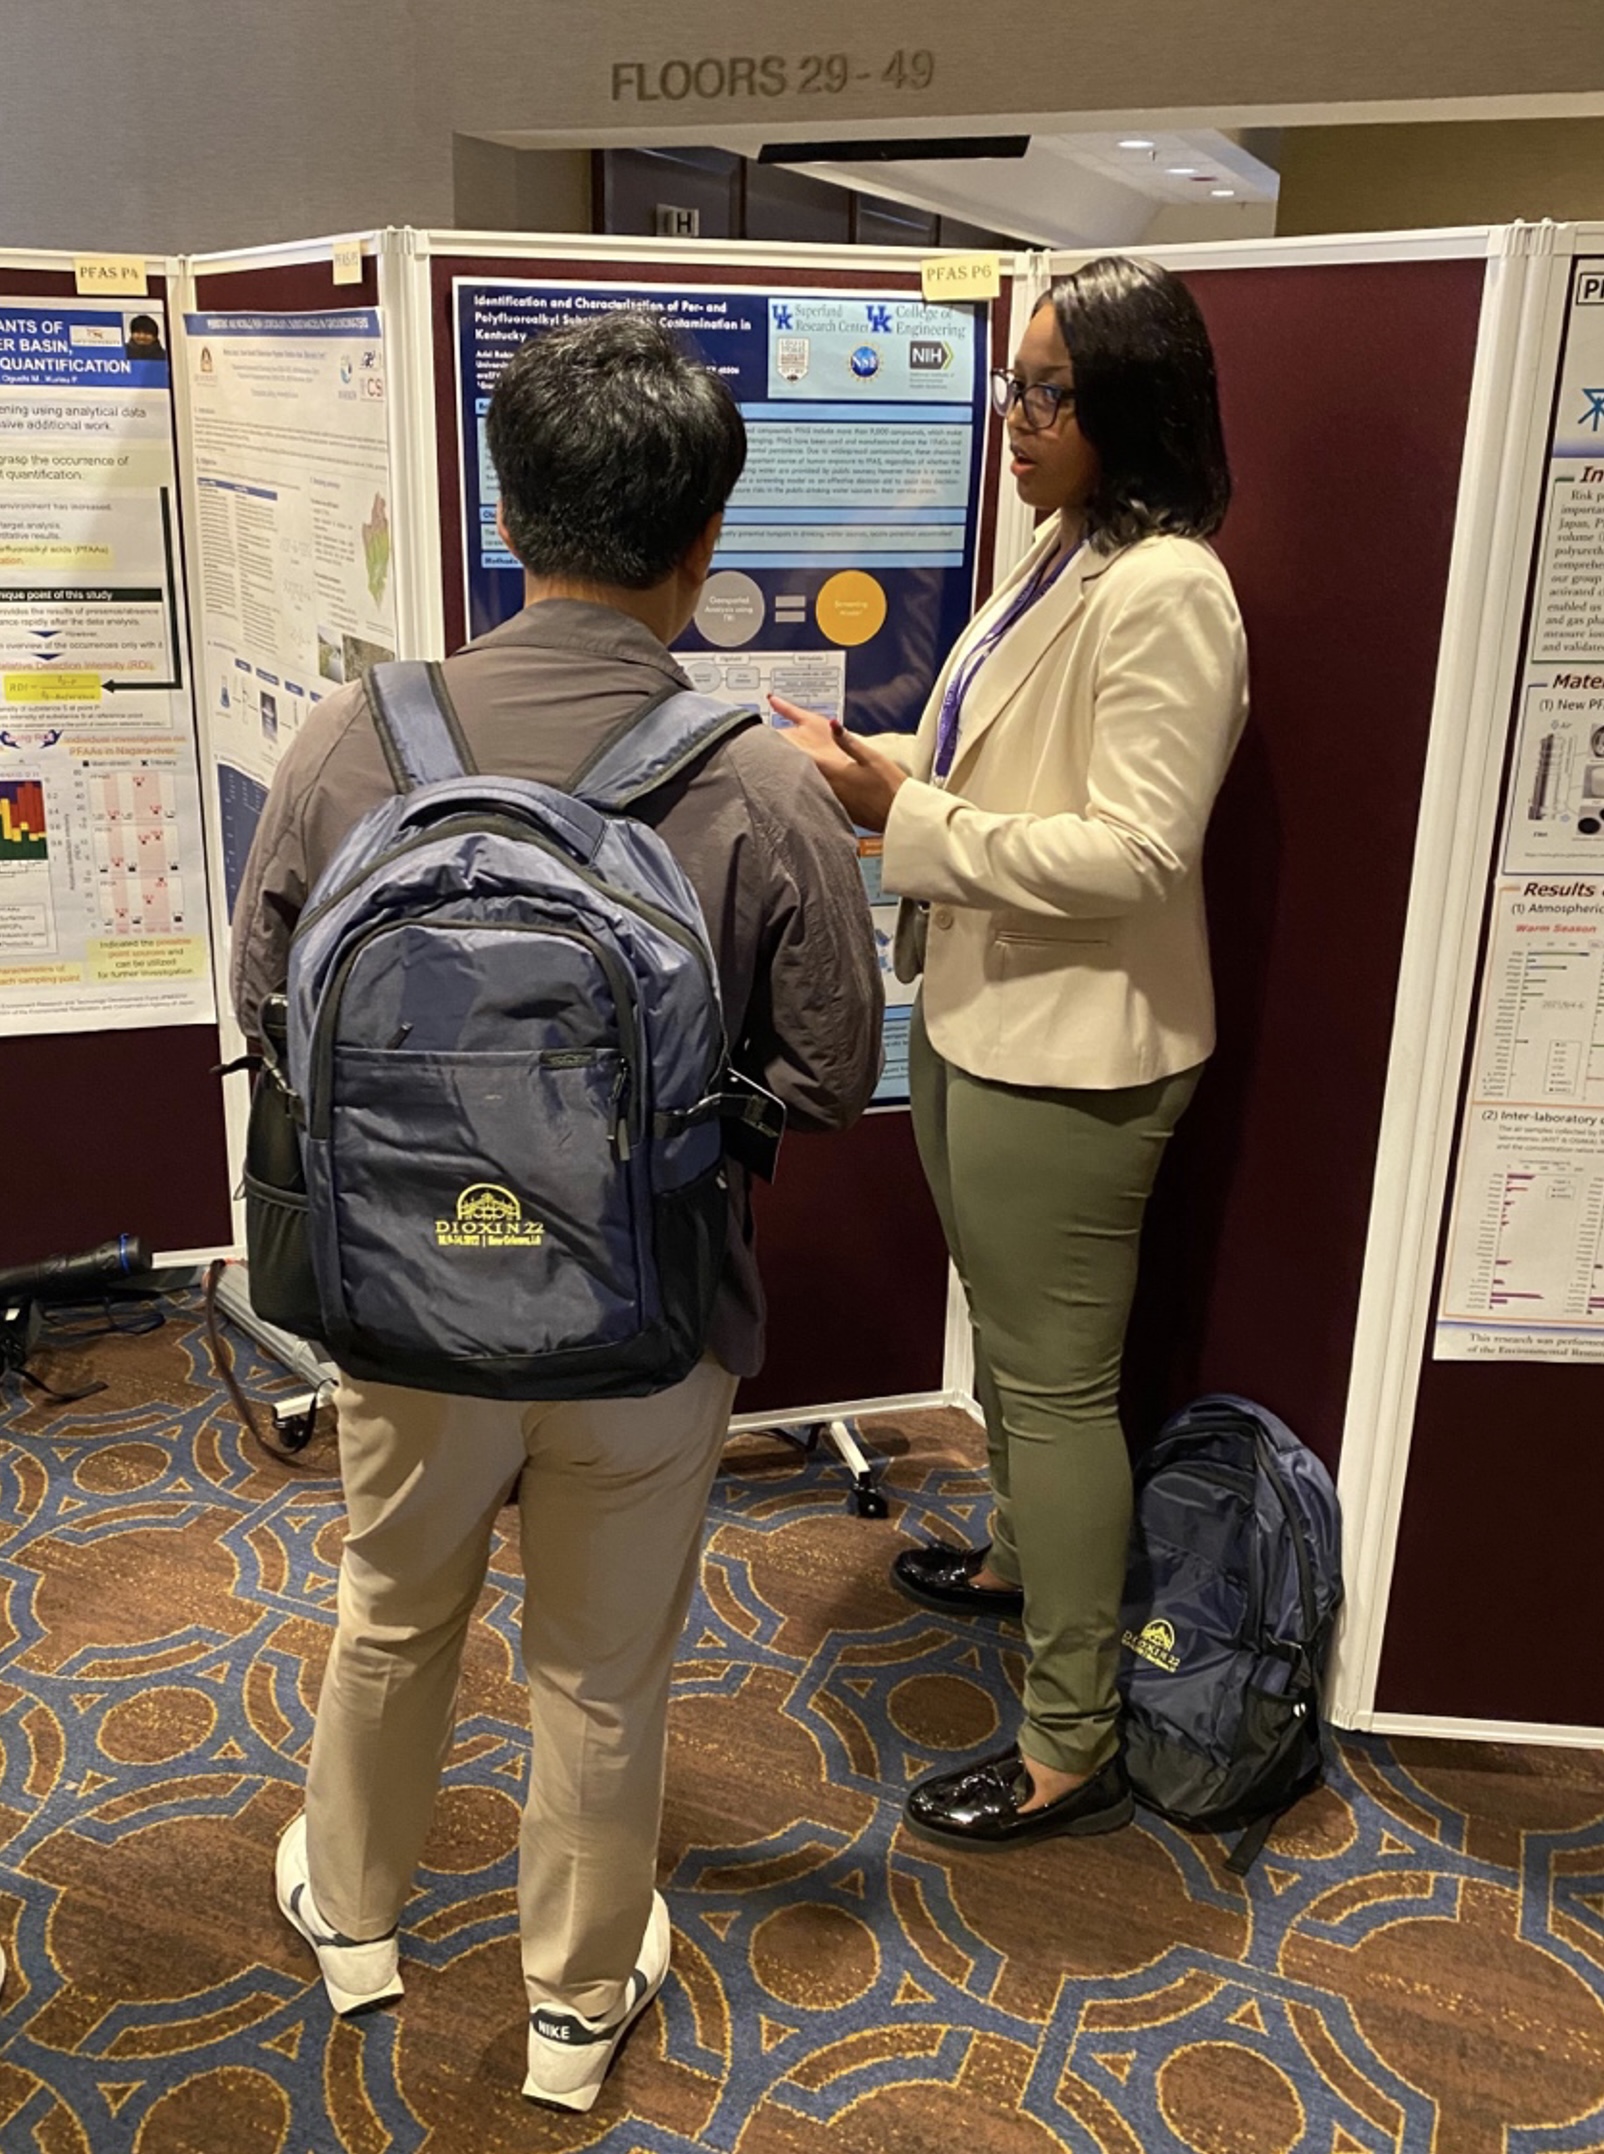 Civil Engineering doctoral student Ariel Robinson presenting her poster to a conference attendee.  Her poster is entitled “Identification and Characterization of Per- and Polyfluoroalkyl Substance (PFAS) Contamination in Kentucky.”  Co-authors: Sweta Ojha